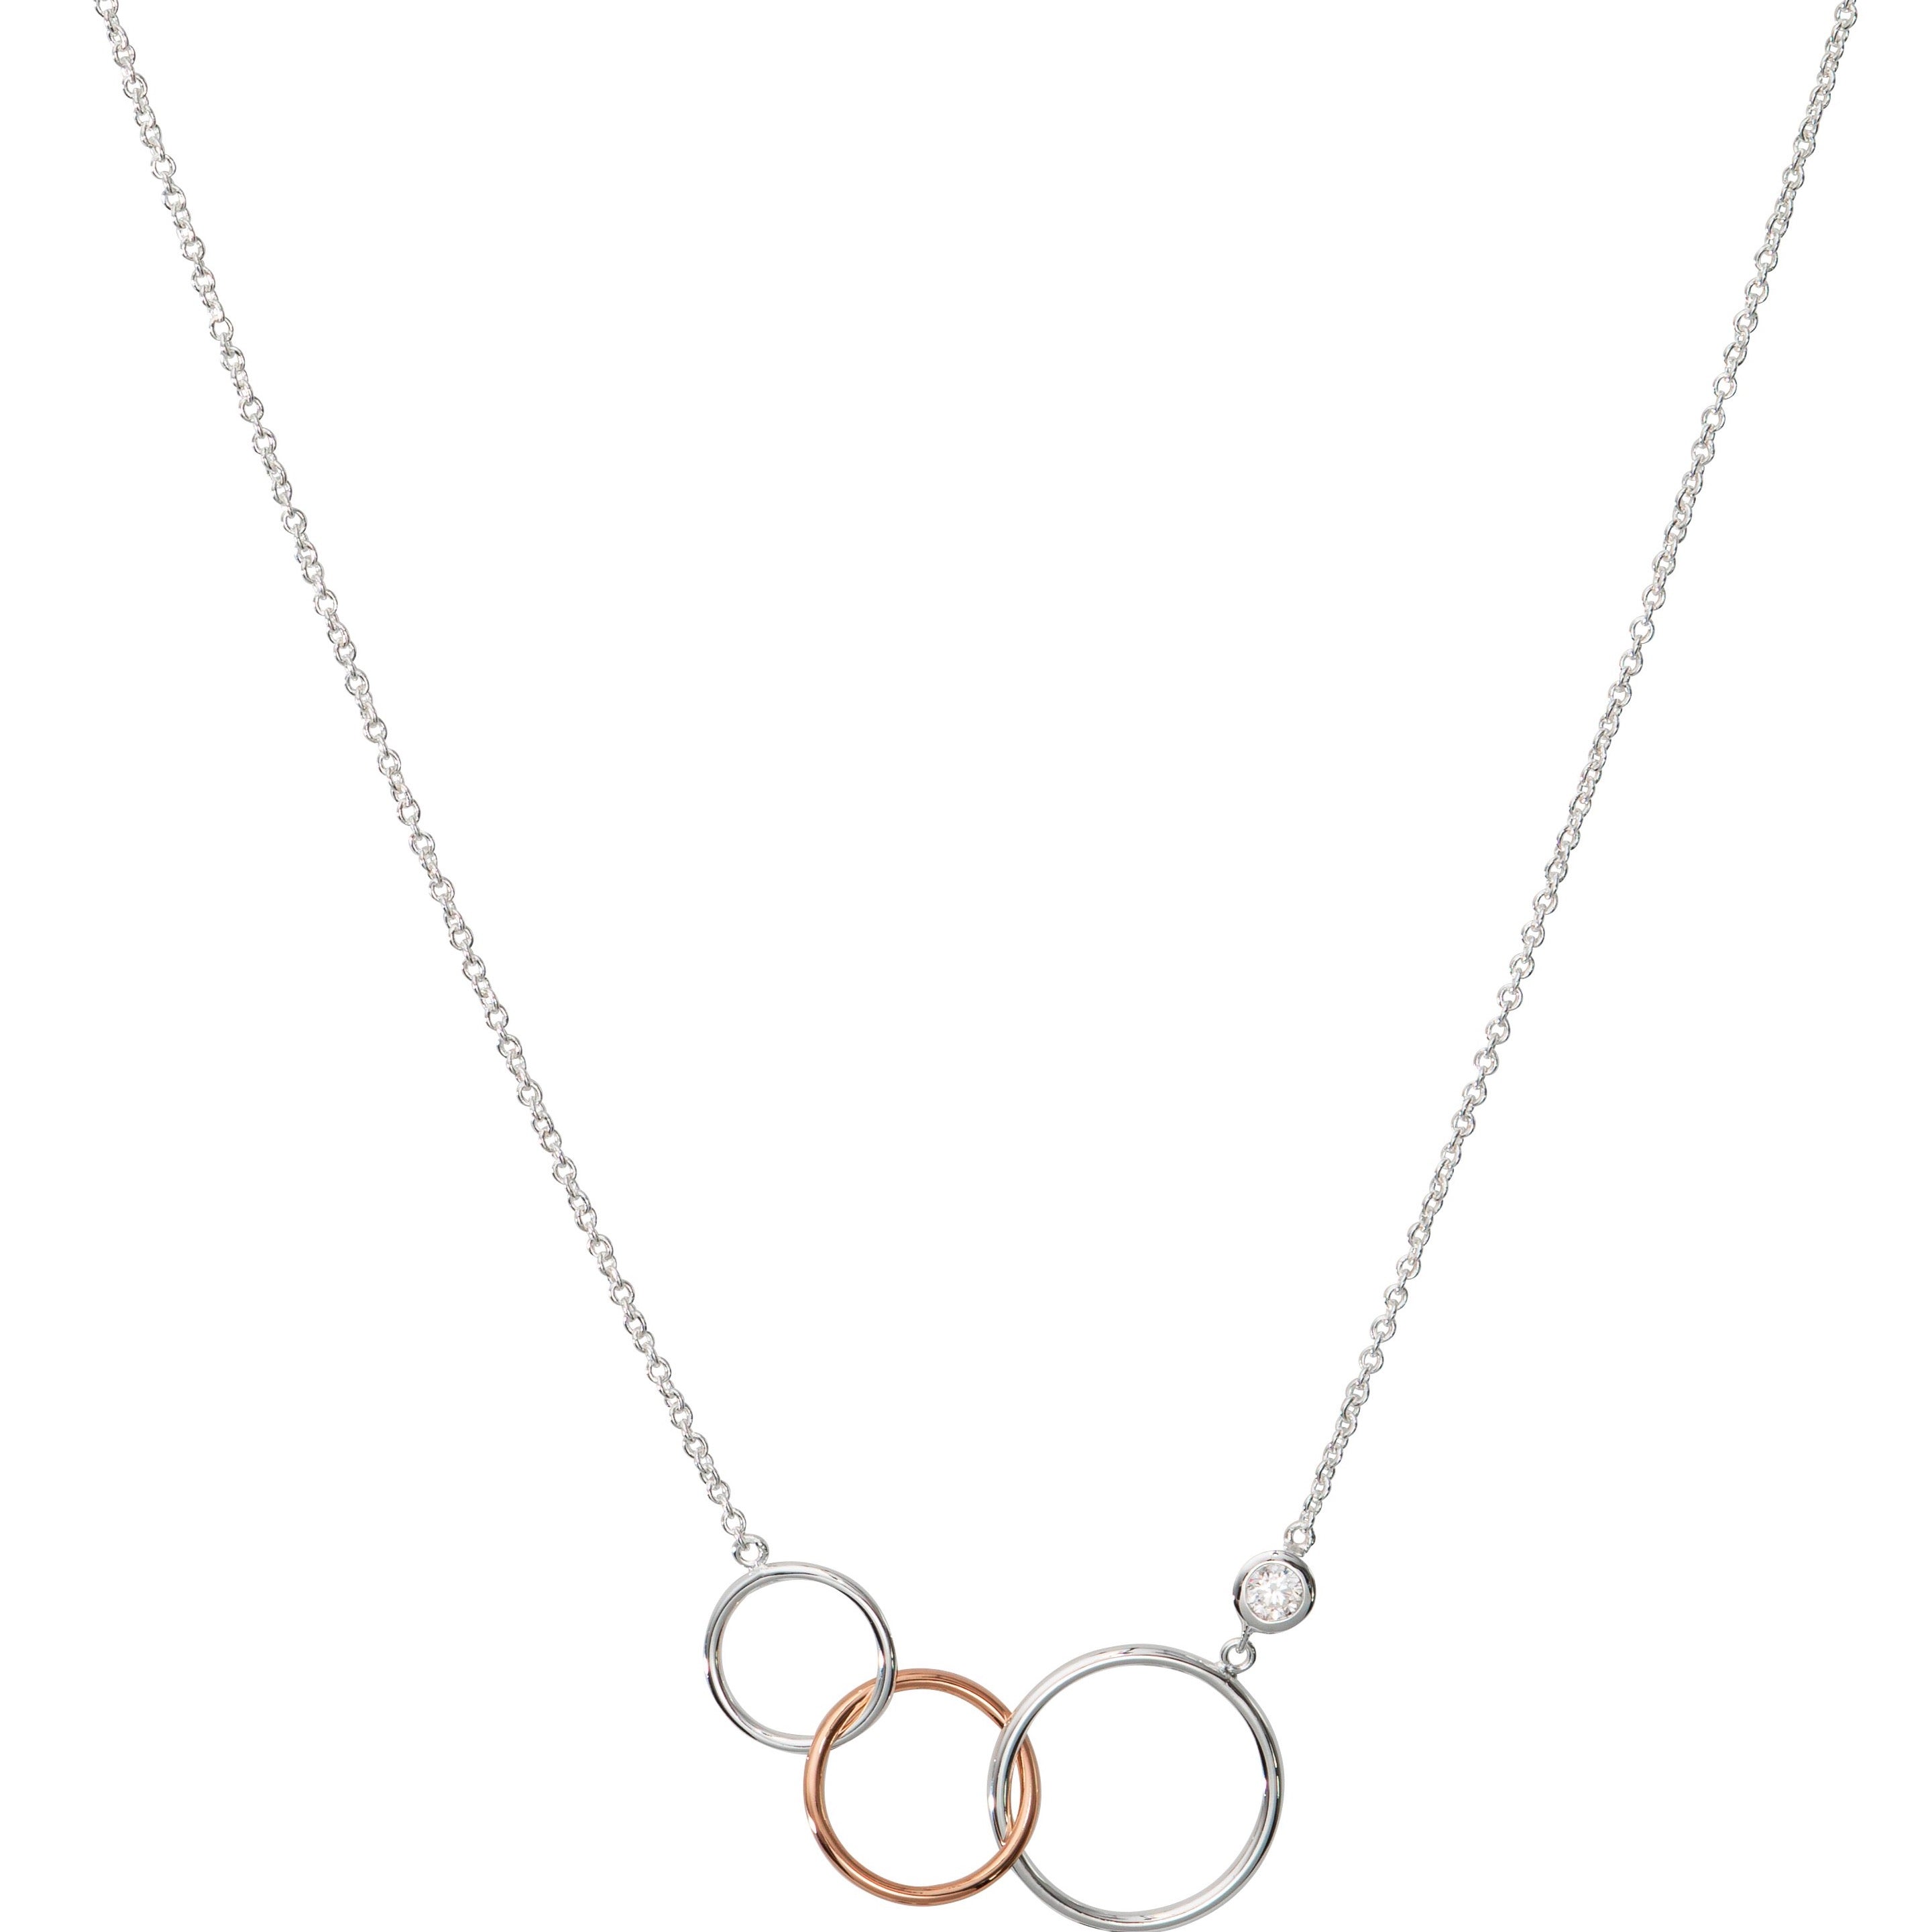 Unique and Co Sterling Silver, Rose Gold and CZ Triple Circle Necklace